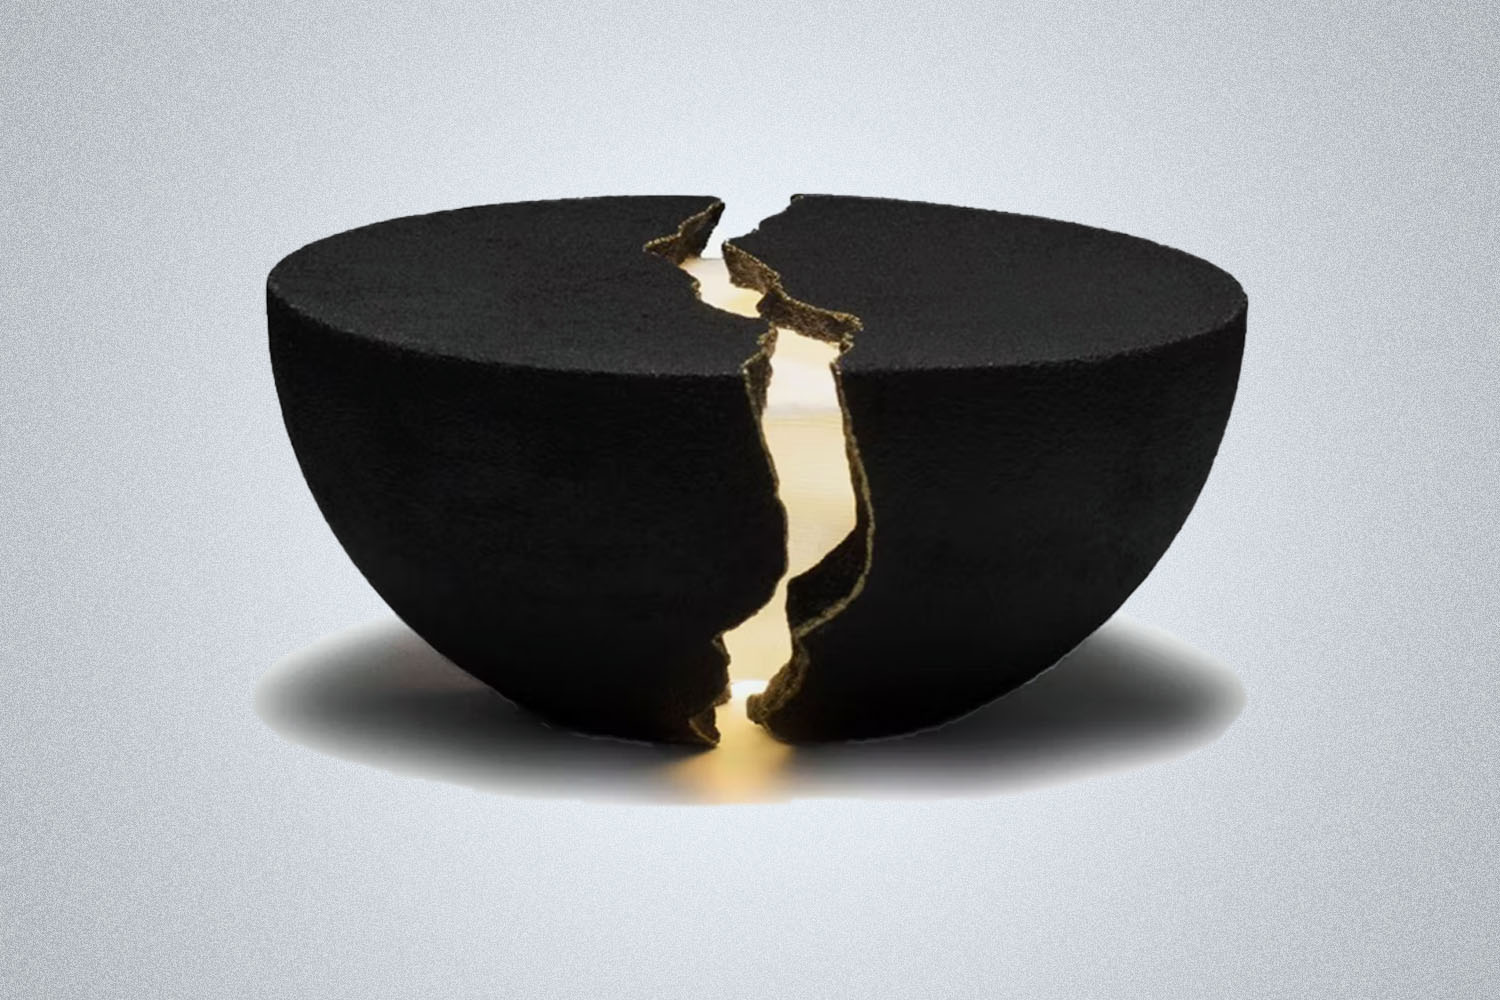 a black split apart speaker with a glowing gold center from Lumio on a grey background